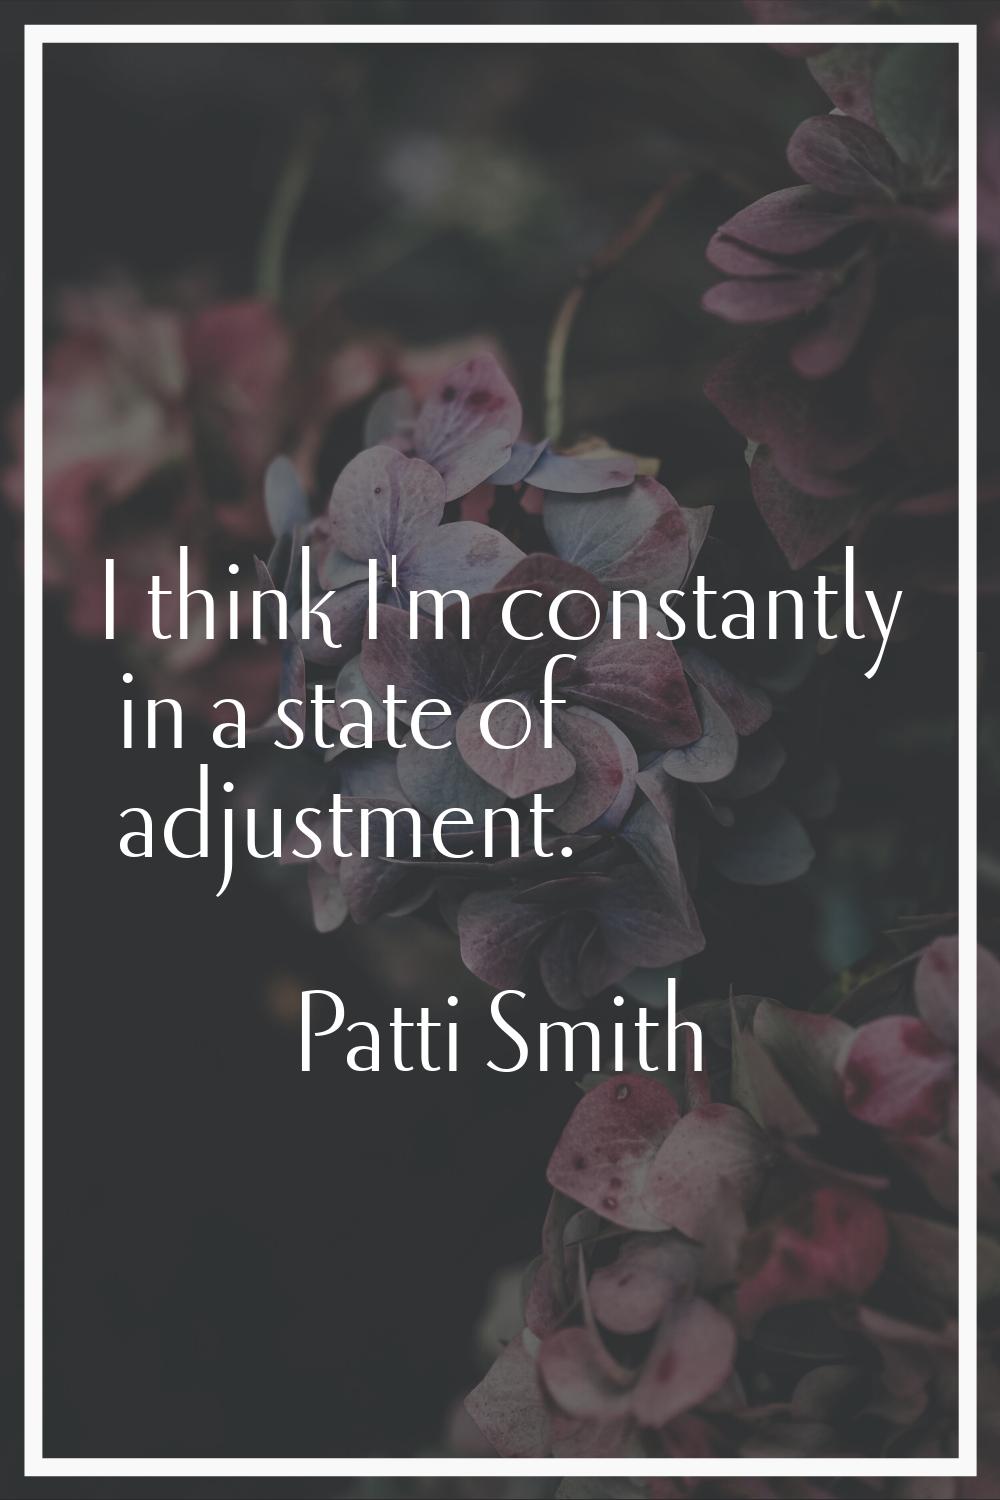 I think I'm constantly in a state of adjustment.